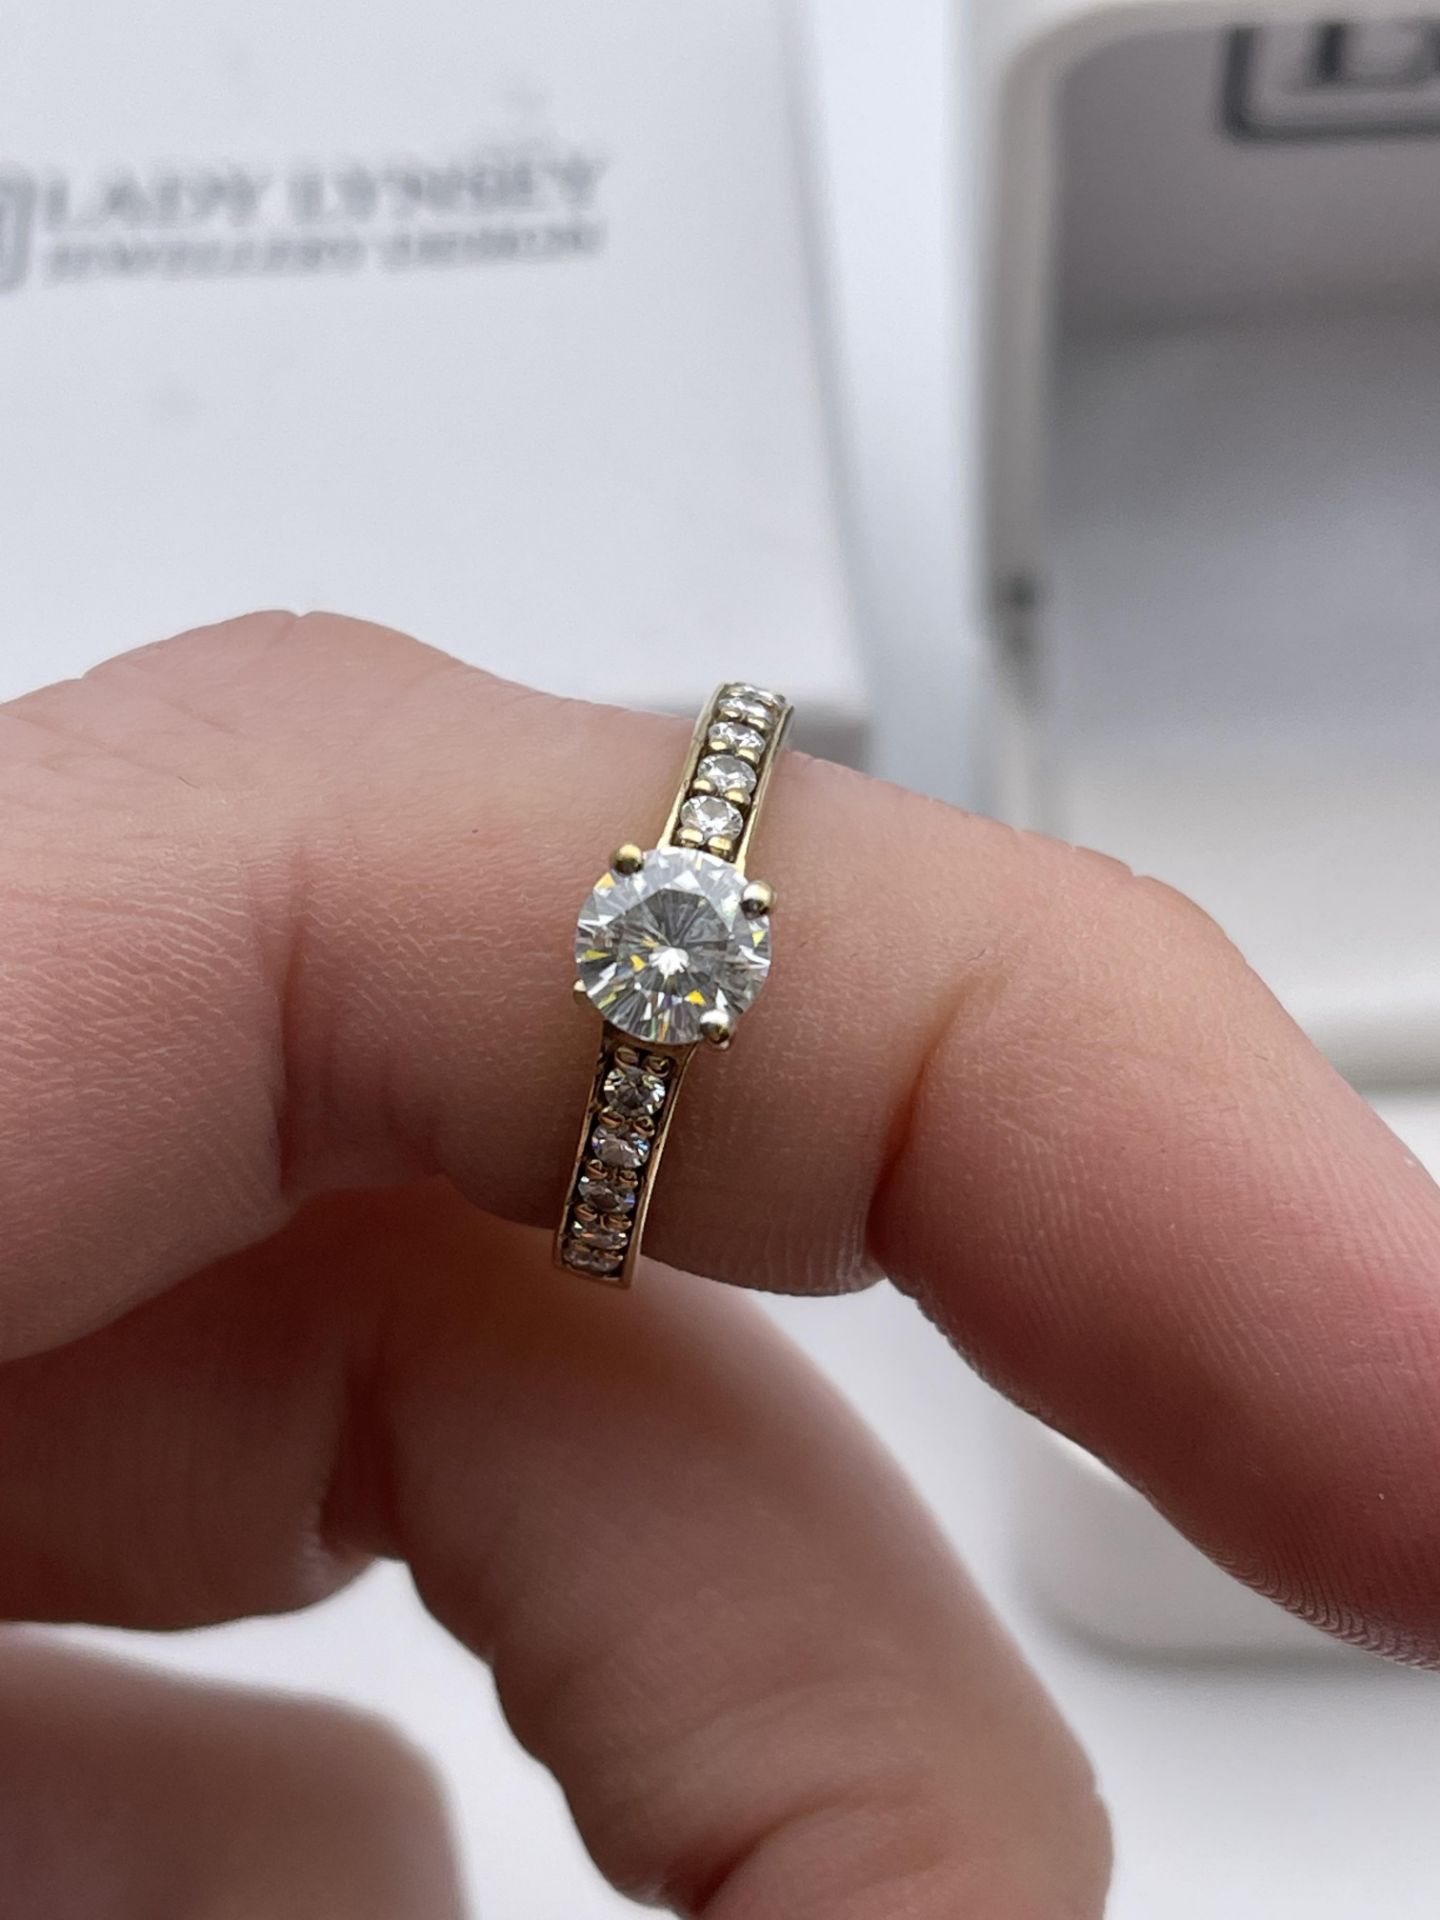 BOXED LADY LYNSEY JEWELLERY DESIGN, 9CT YELLOW GOLD SOLITAIRE RING, SET WITH STONES ON THE SHANK, - Image 2 of 3